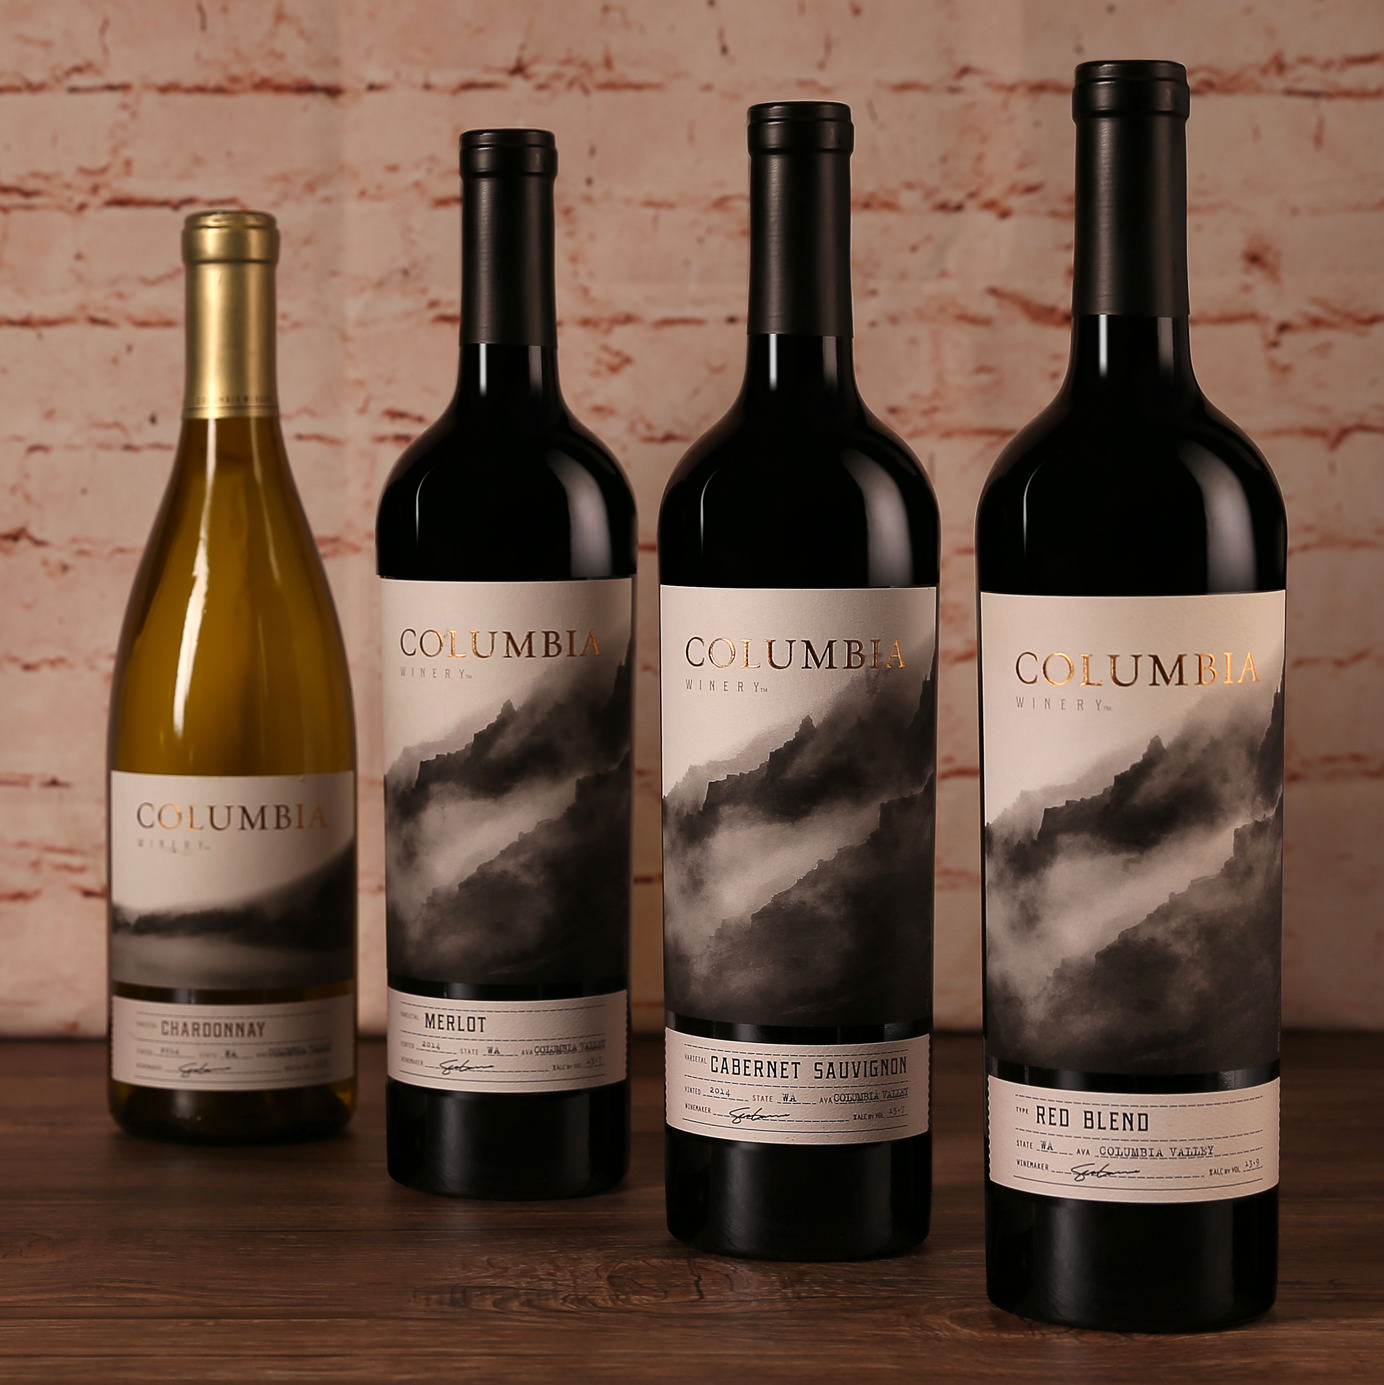 Design Behind the Vine: This Winery’s Labels Are Turning Terroir Into Art